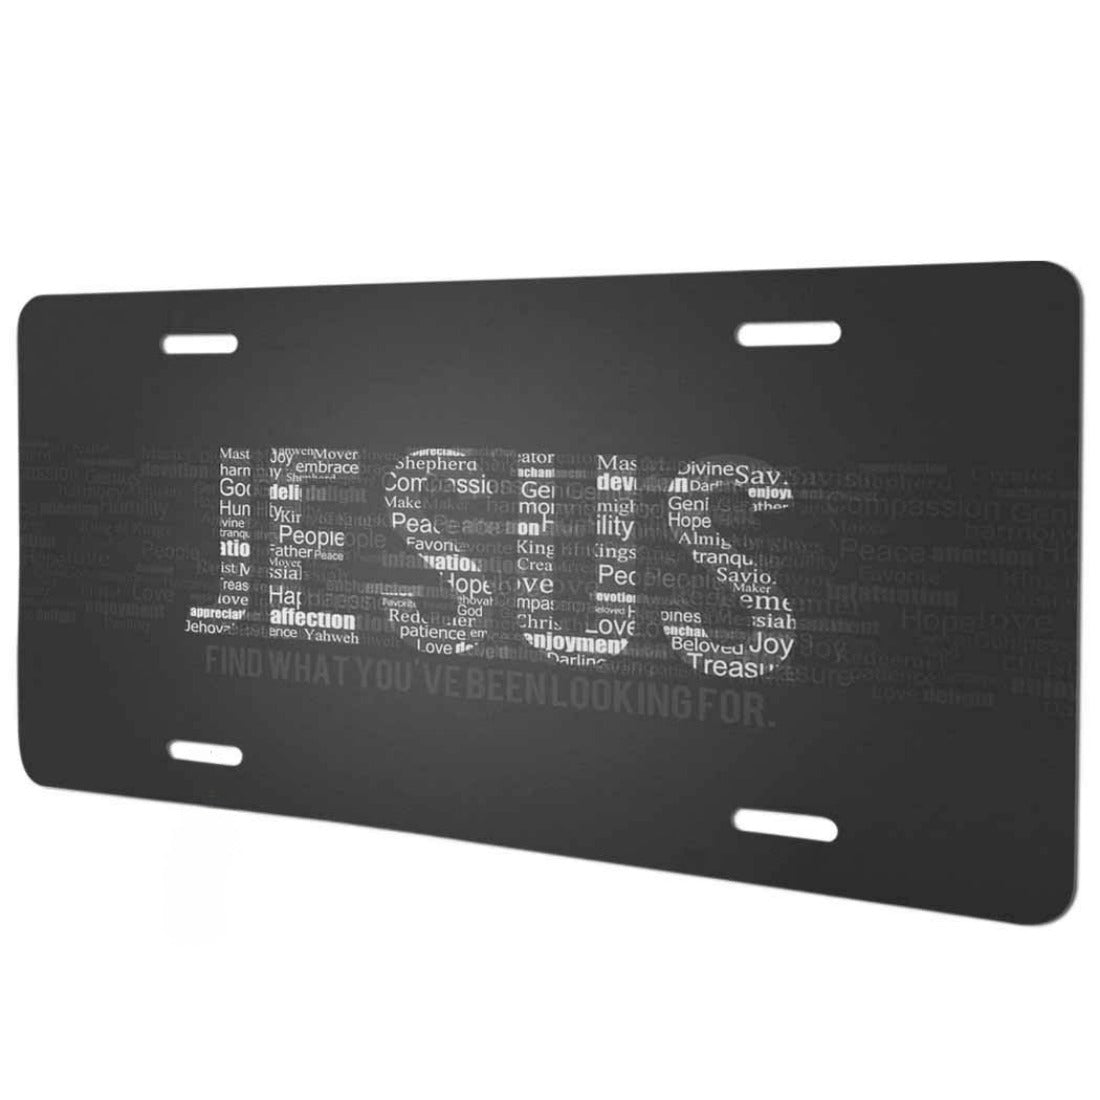 Jesus What You've Been Looking For Christian Front License Plate claimedbygoddesigns